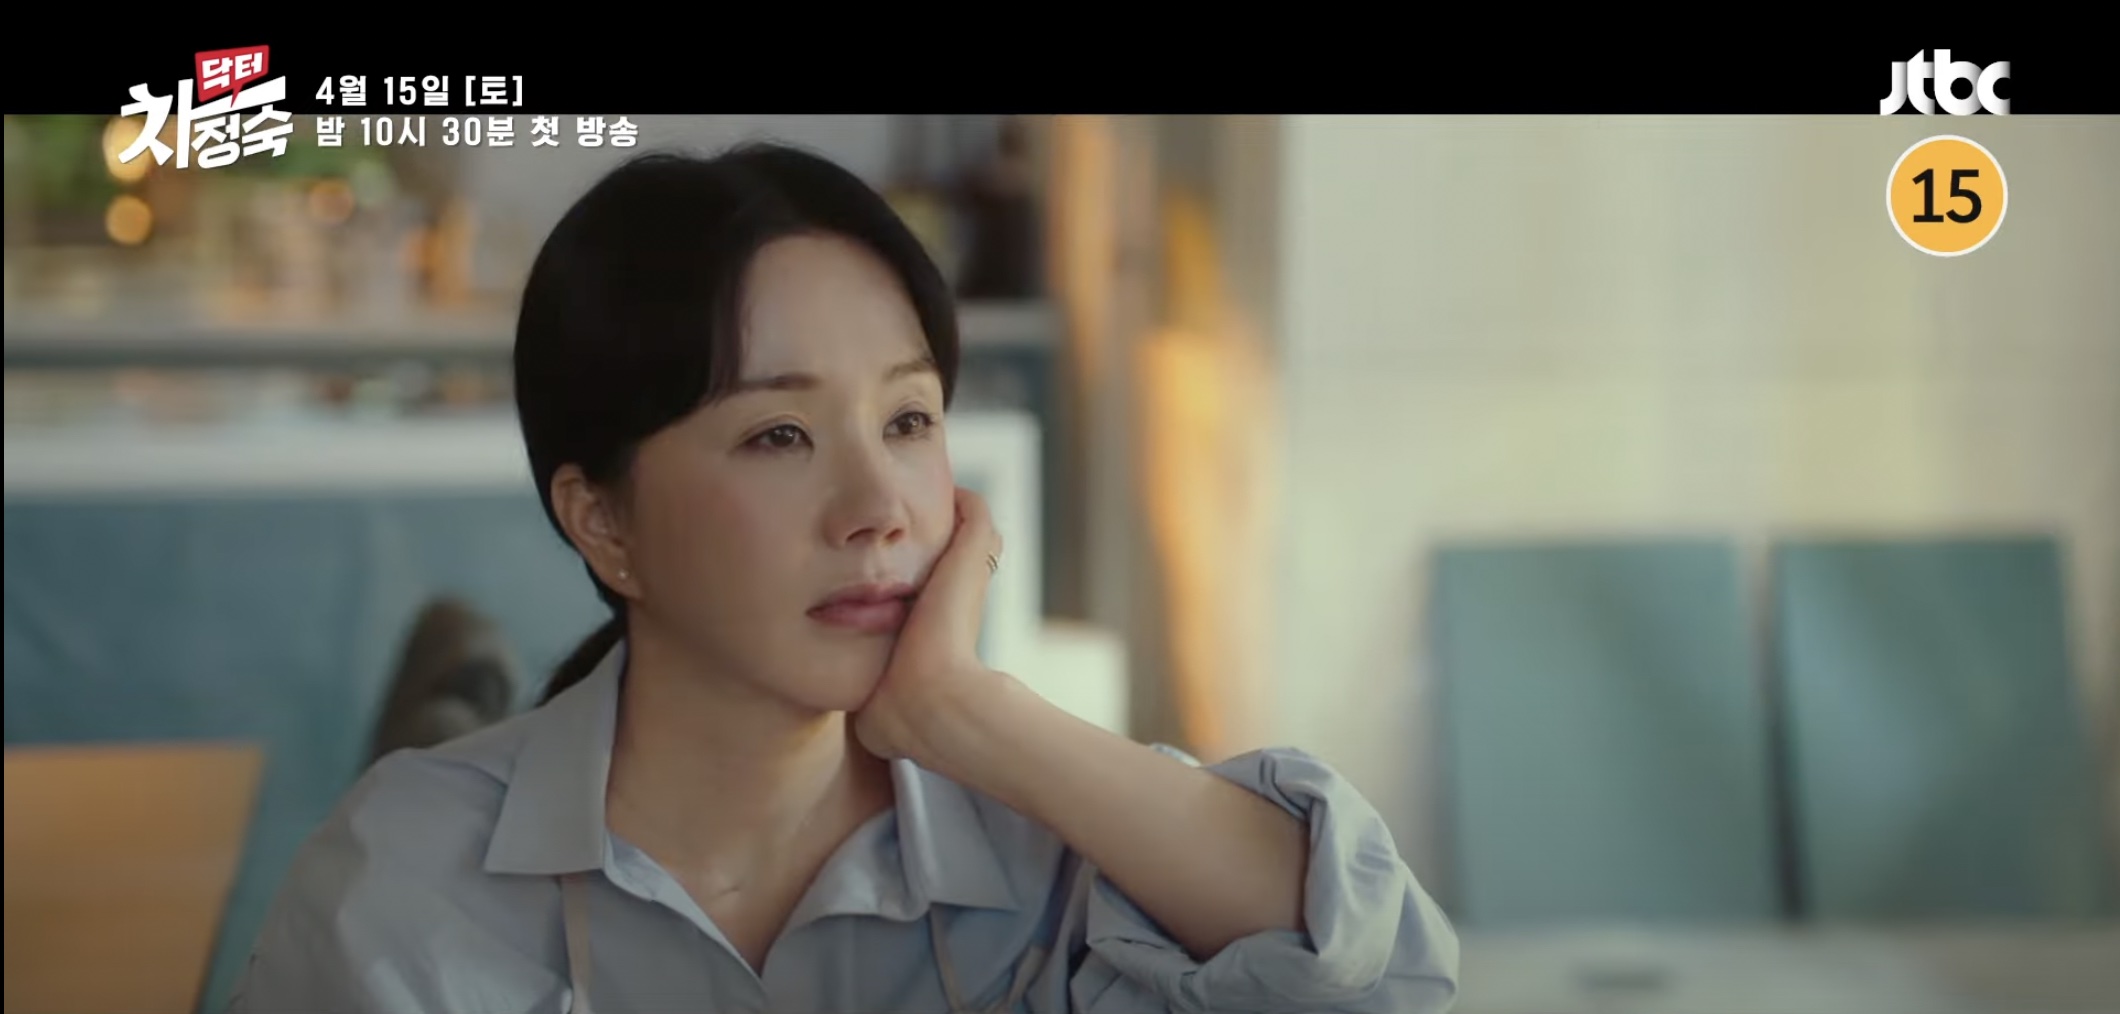 Doctor Cha Jung-sook reboots her life in first teaser